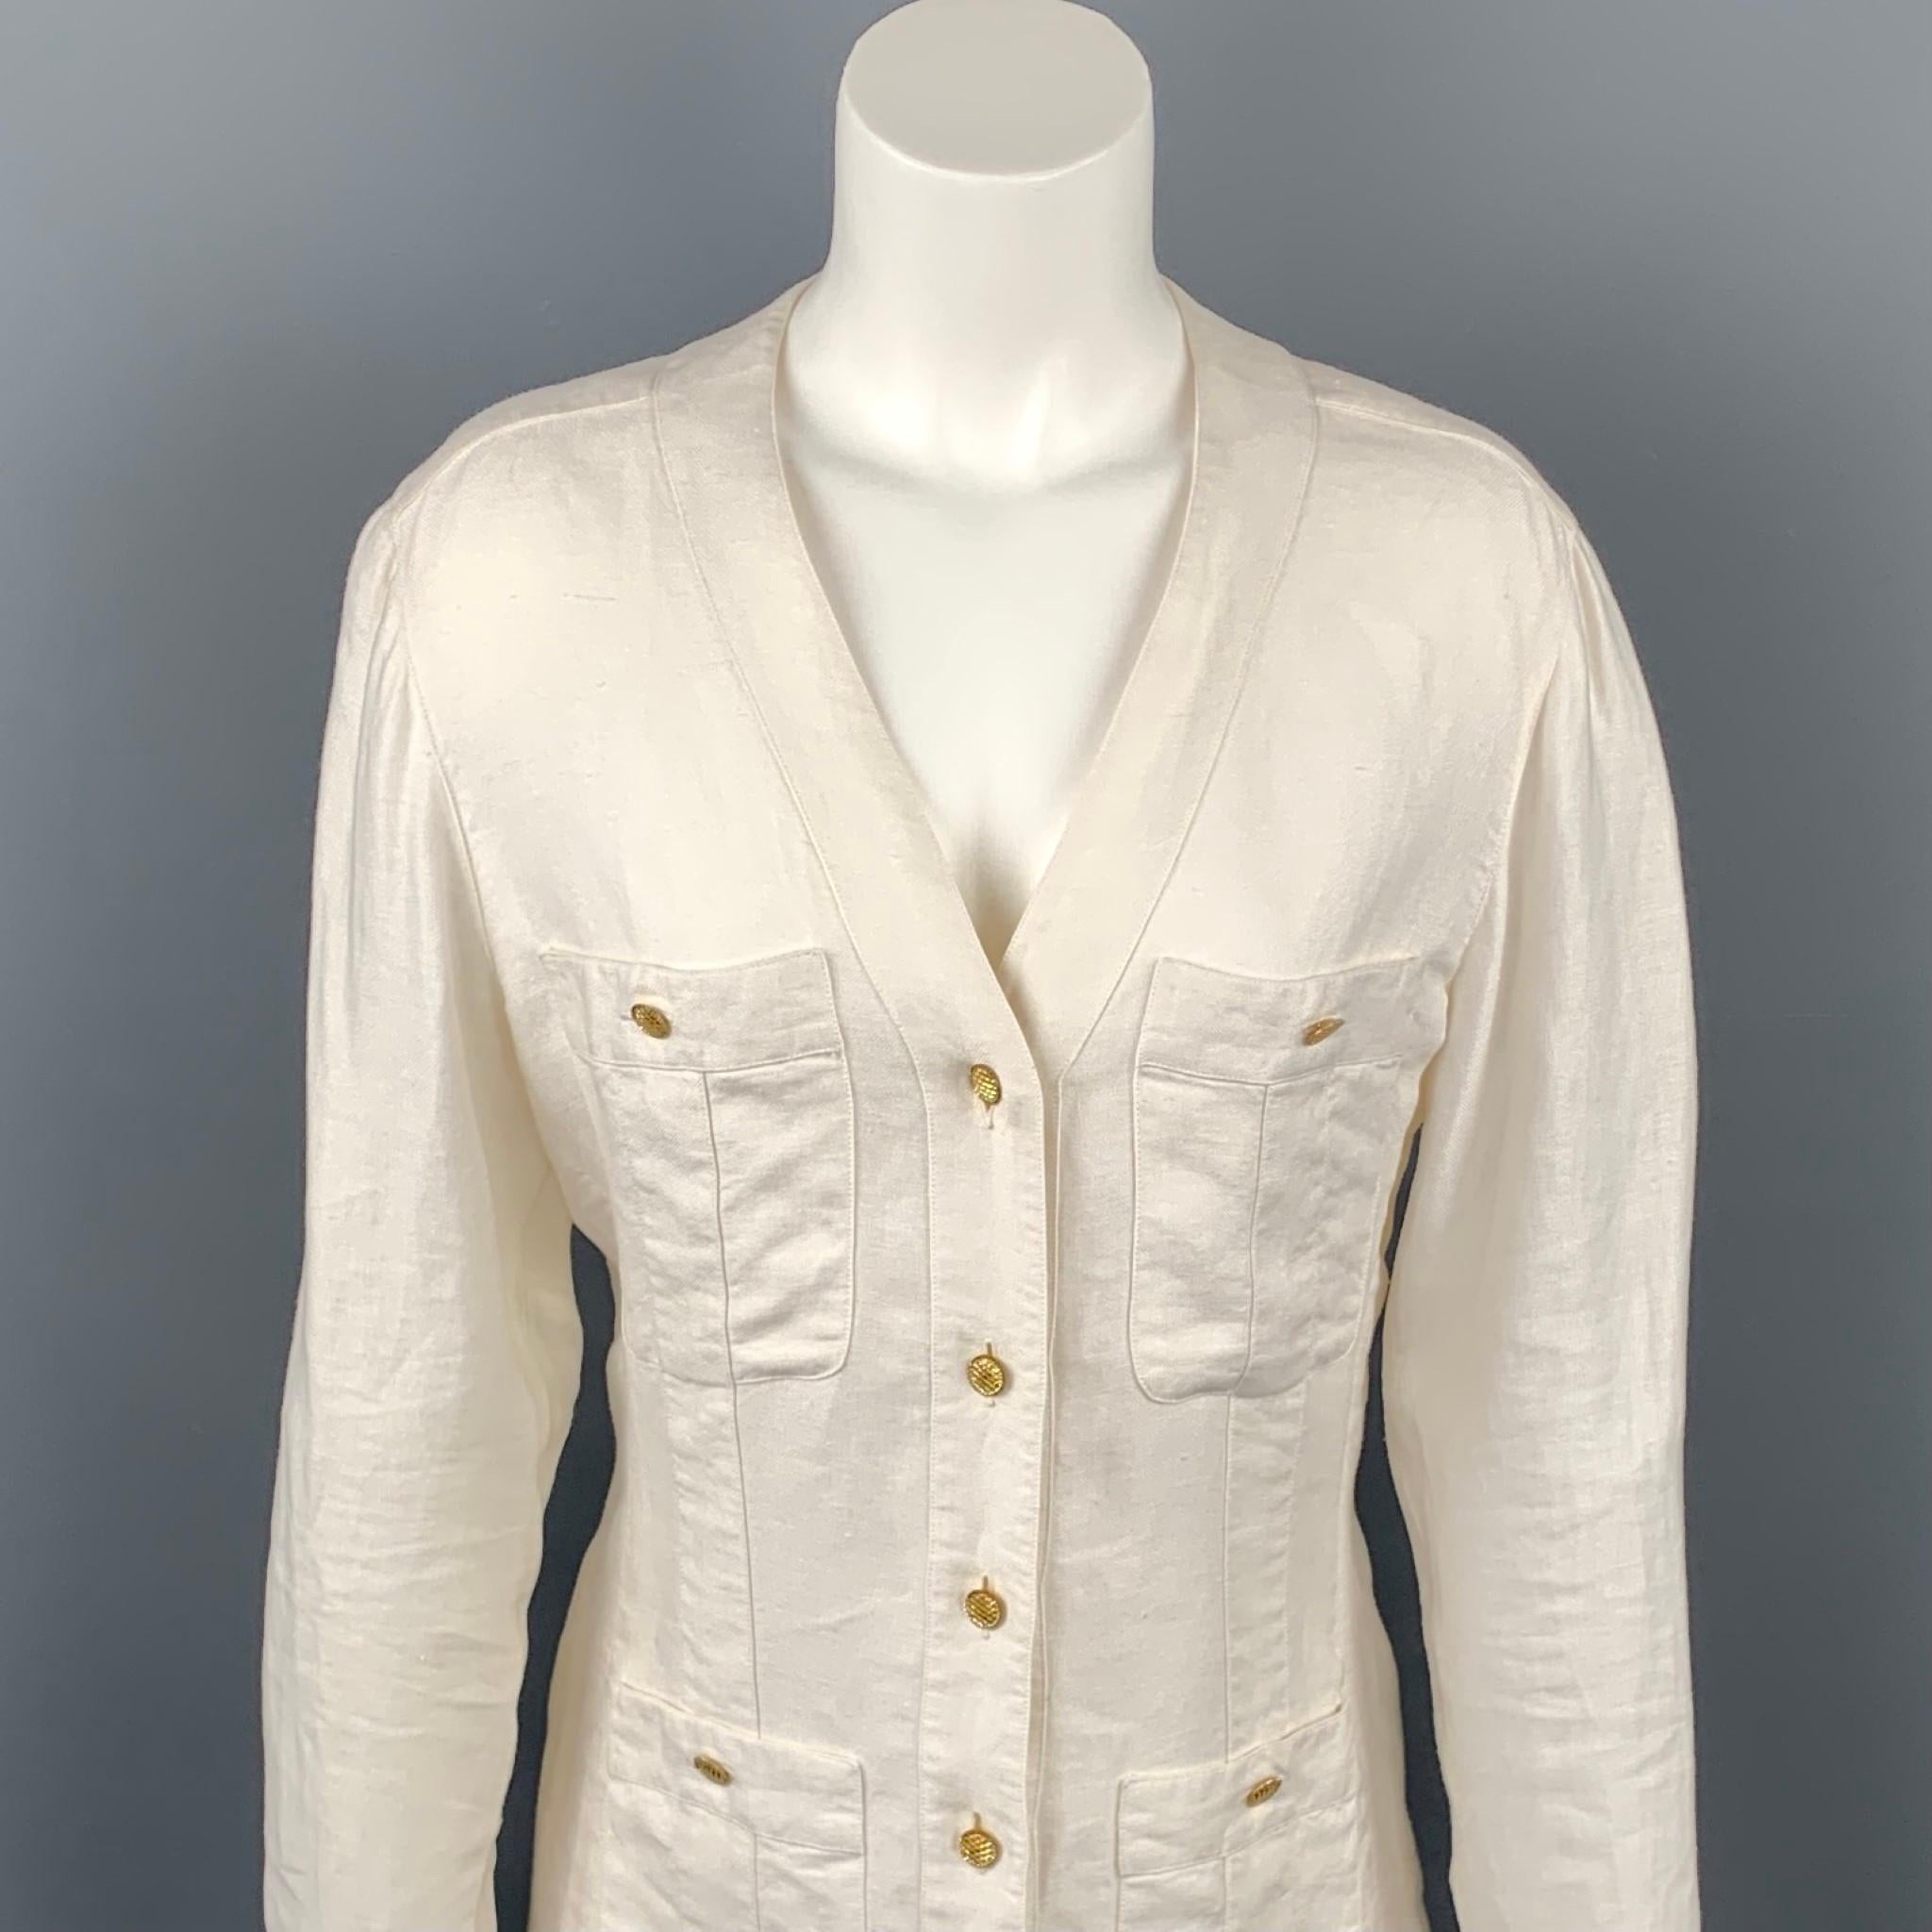 Vintage CHANEL jacket comes in cream linen featuring a v-neck, yellow gold tone metal buttons, and patch button pockets. Wear consistent with age. Made in France.

Good Pre-Owned Condition.
Marked: FR 36

Measurements:

Shoulder: 15 in.
Bust: 39